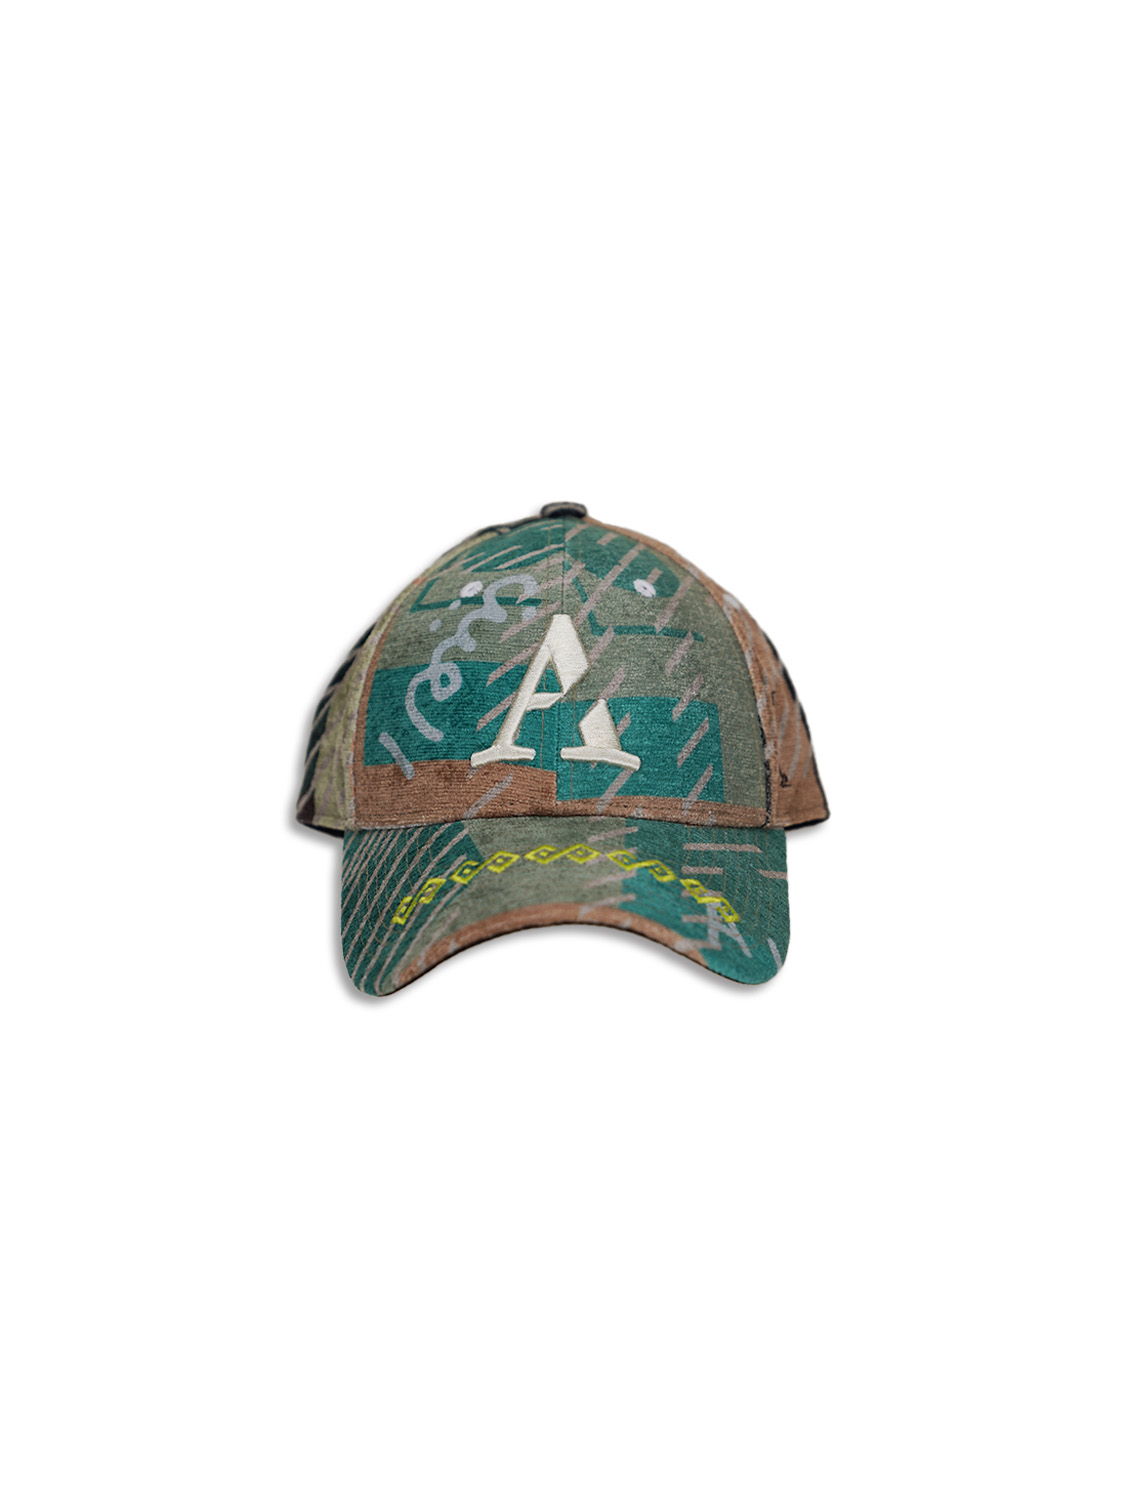 Palace - Cap mit Muster